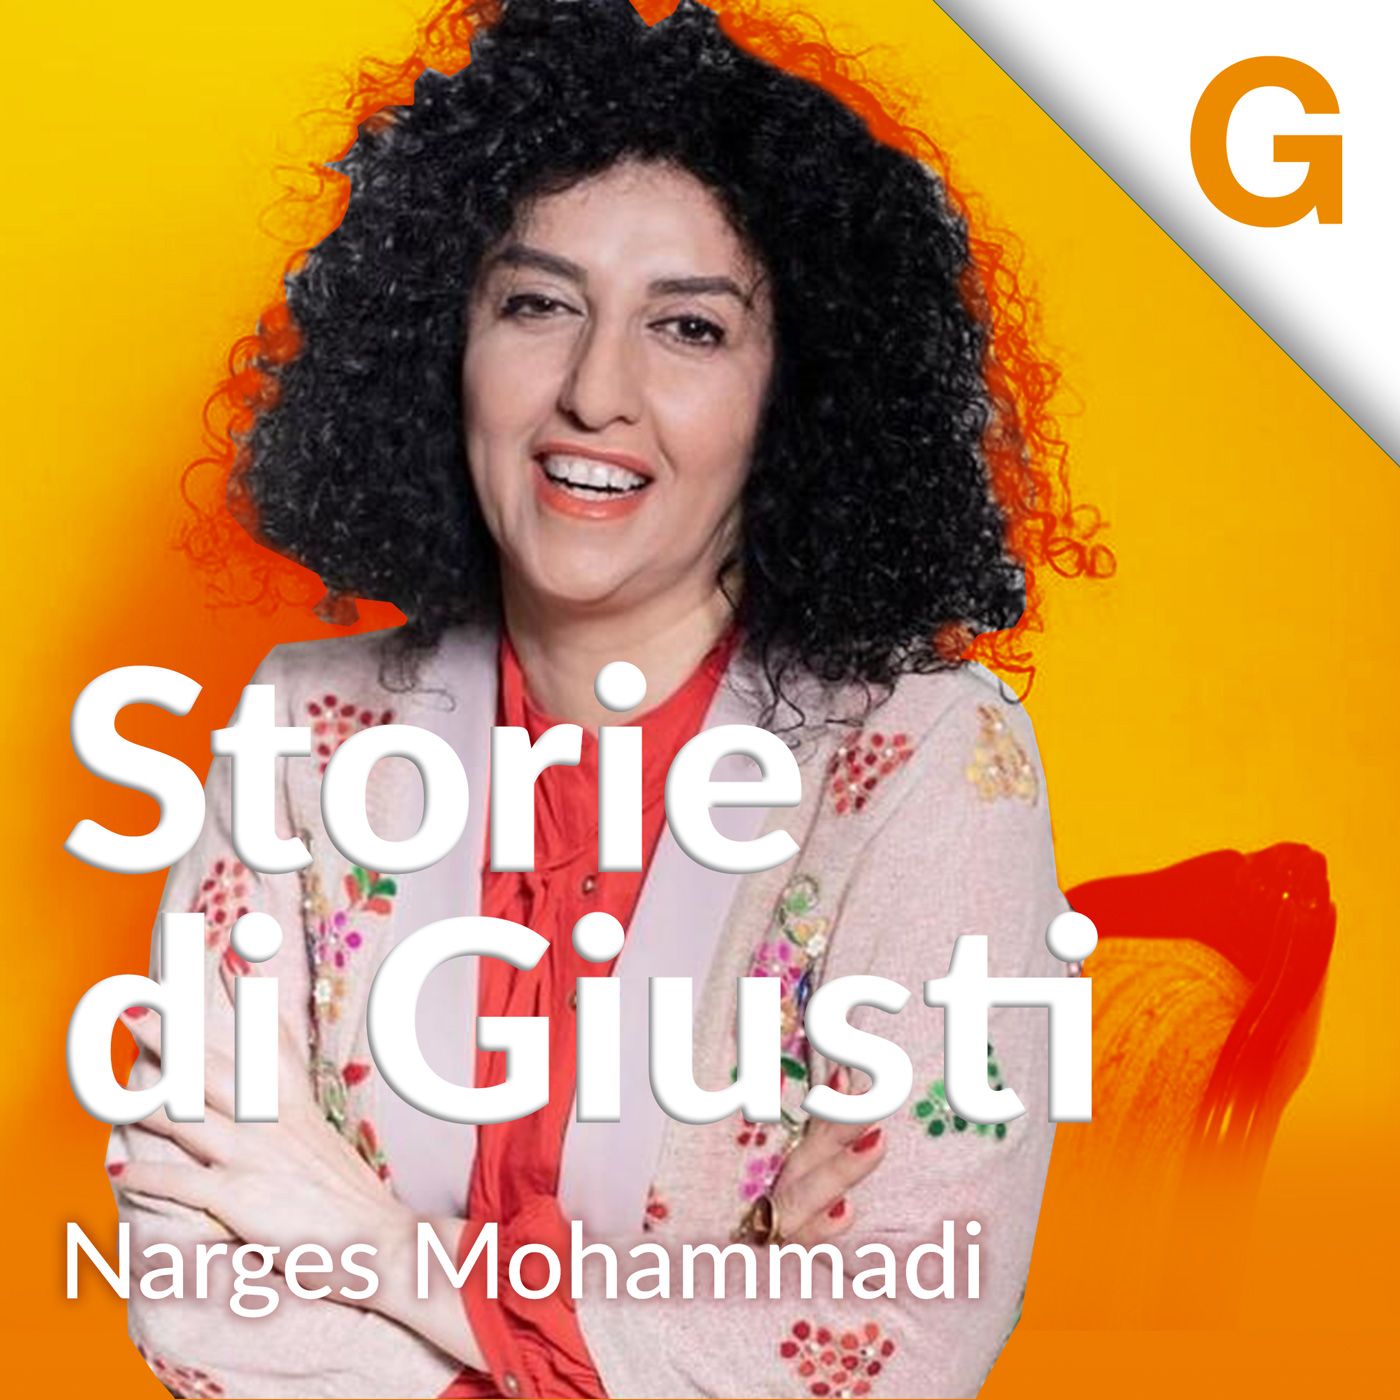 S3 E6: Narges Mohammadi